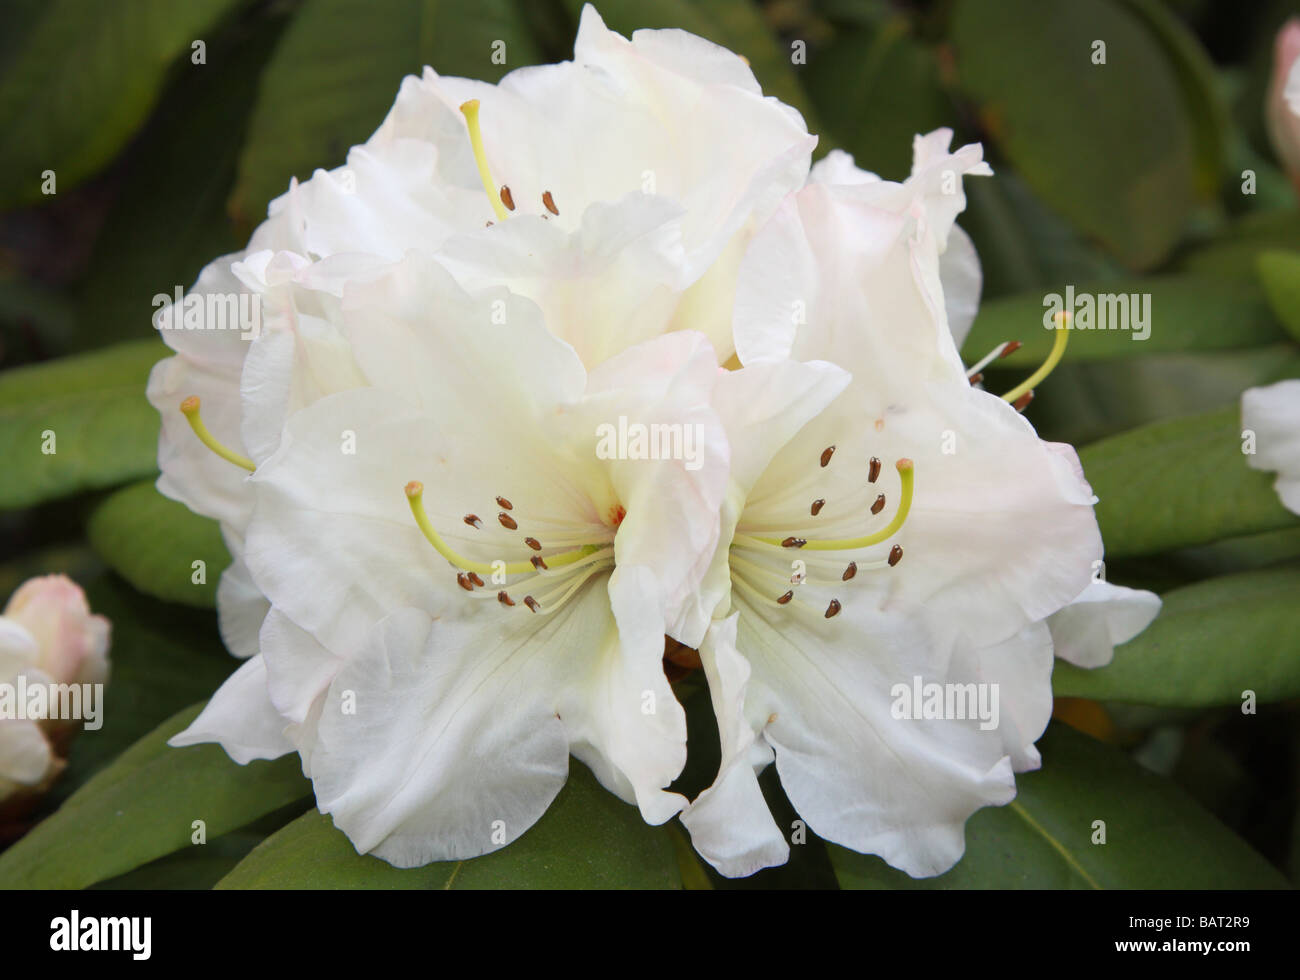 White rhododendron flower close up Rhododendron 'Adriaan Koster' Stock Photo